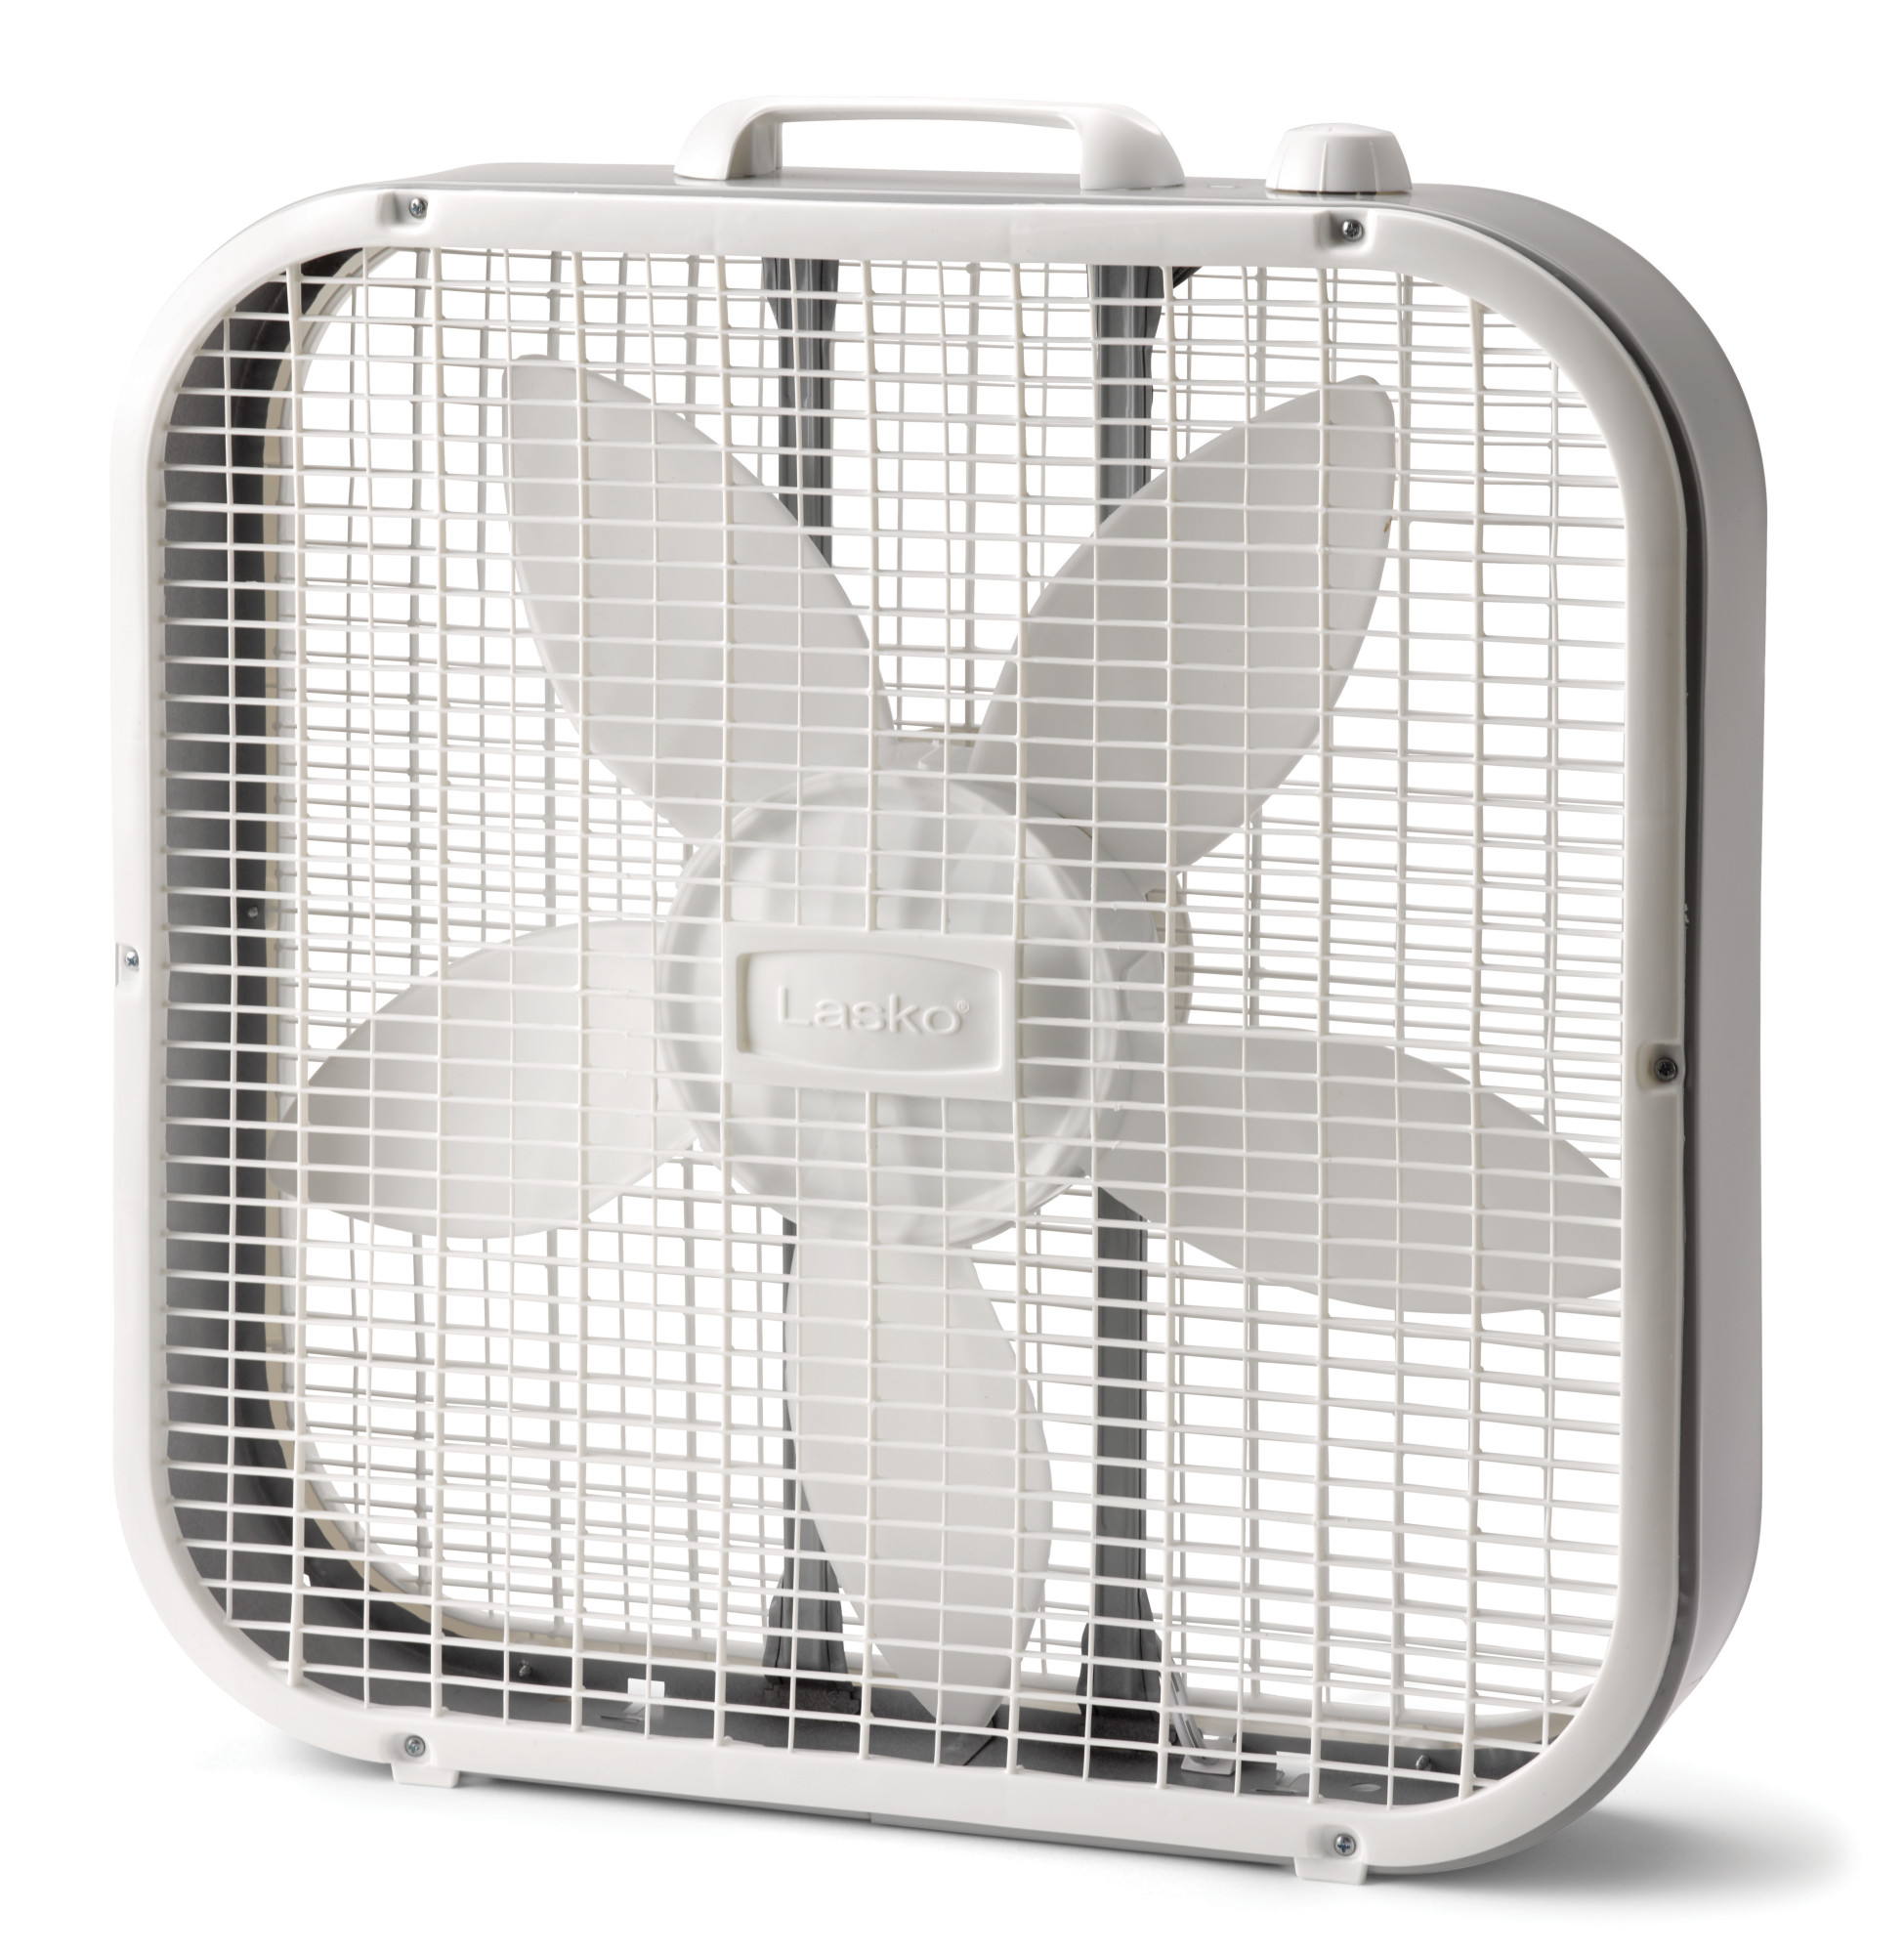 Lasko 20" Classic Box Fan with Weather-Resistant Motor, 3 Speeds, 22.5" H, White, B20200, New - image 1 of 6